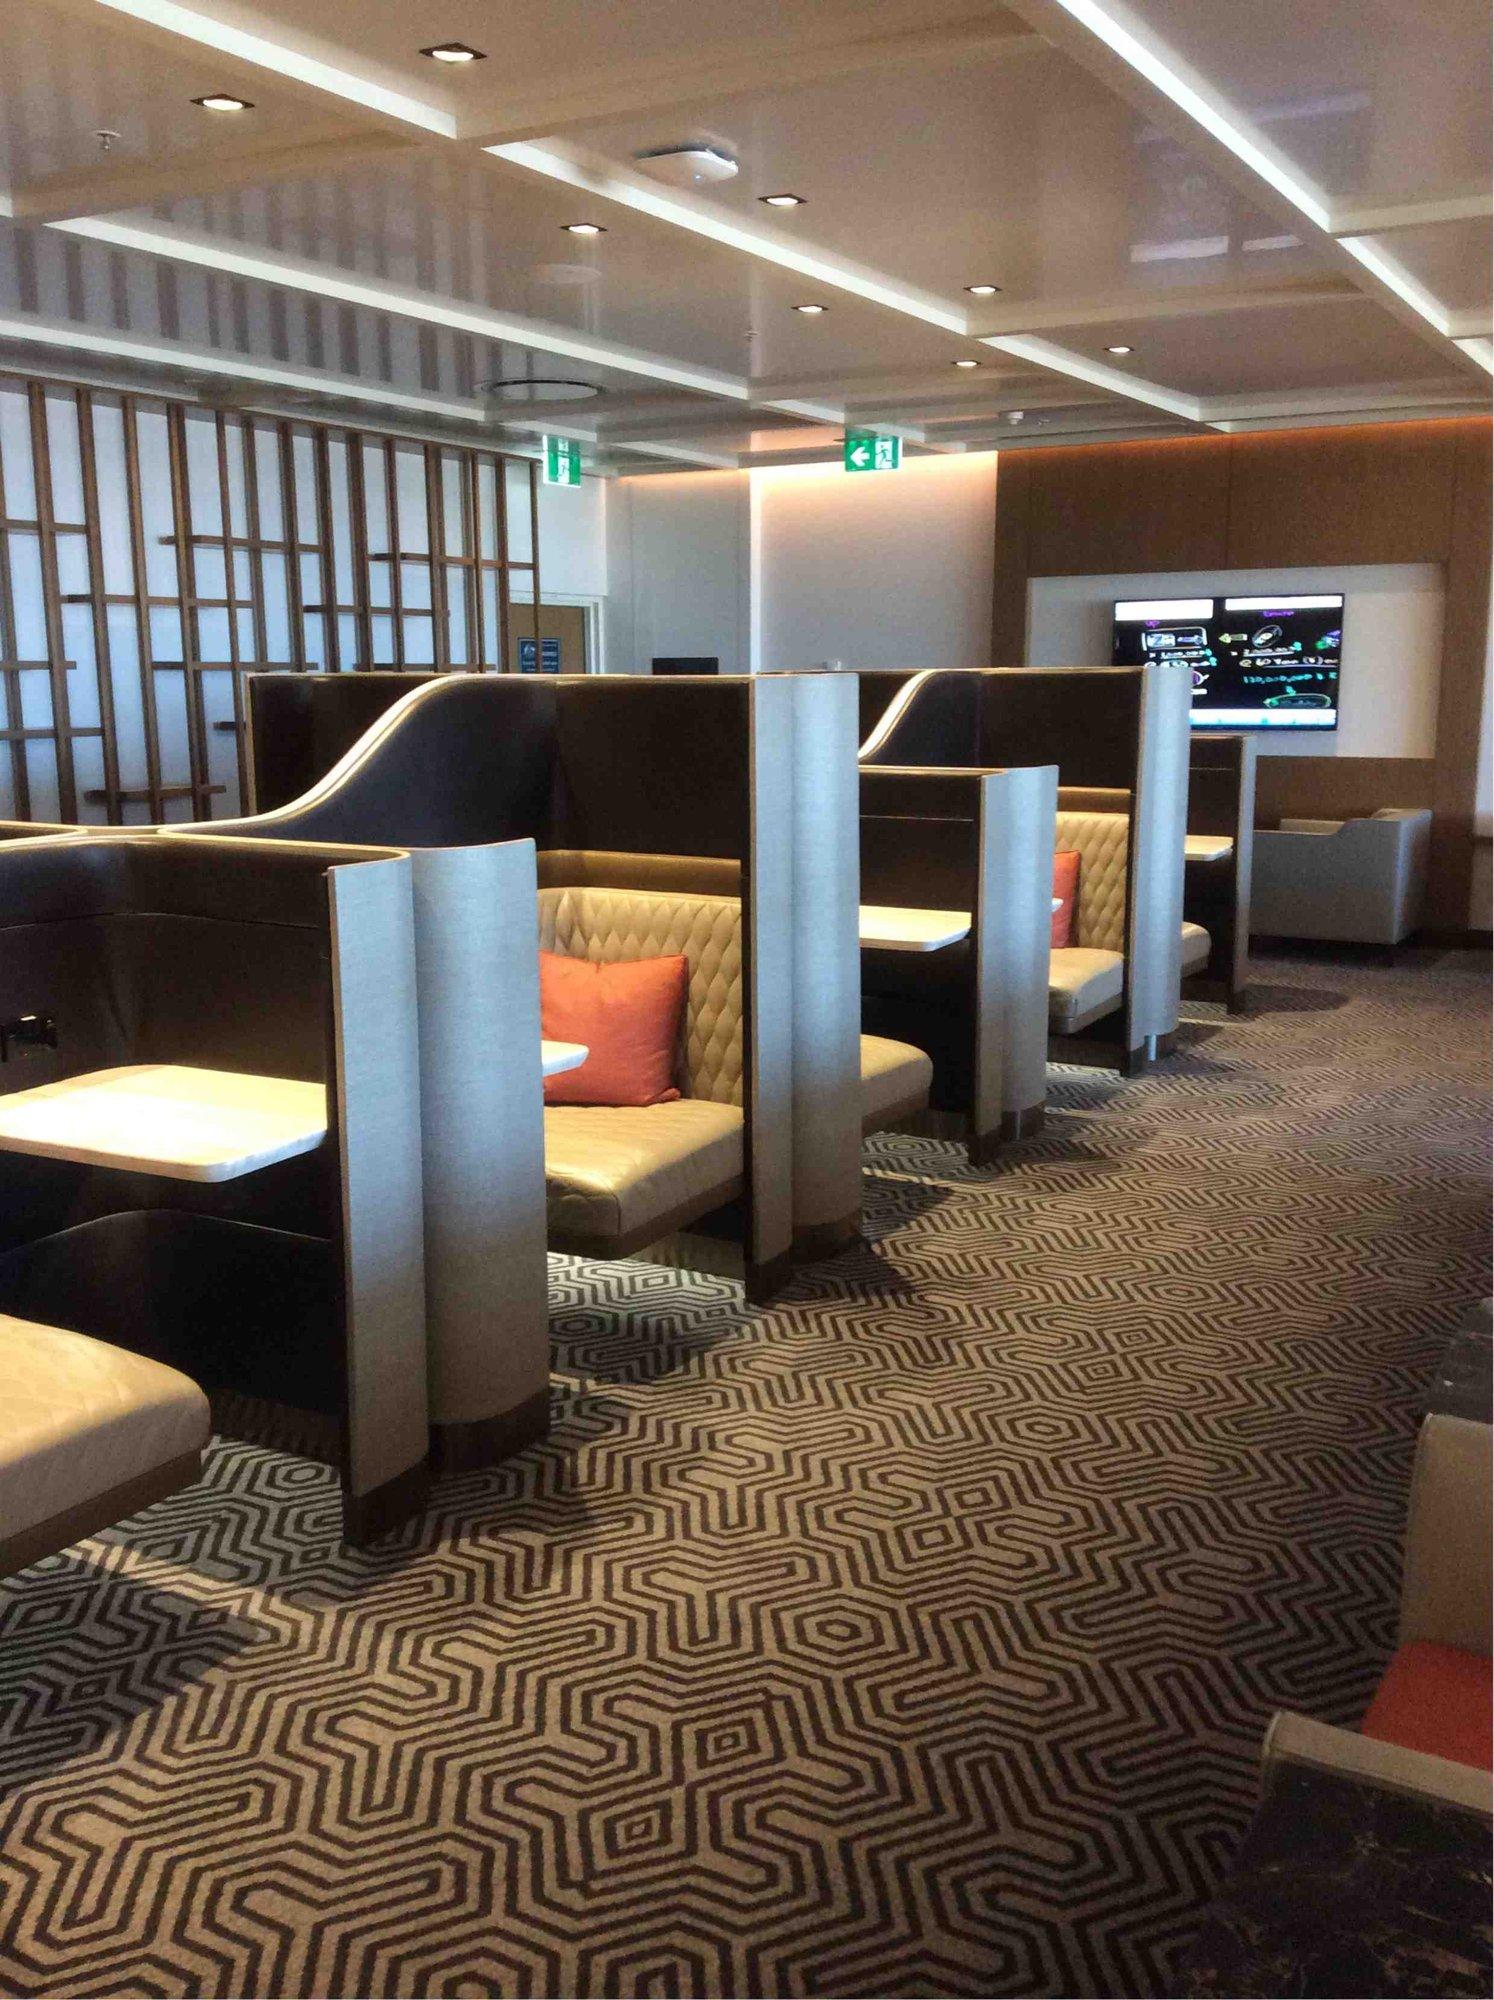 Singapore Airlines SilverKris Business Class Lounge image 6 of 20